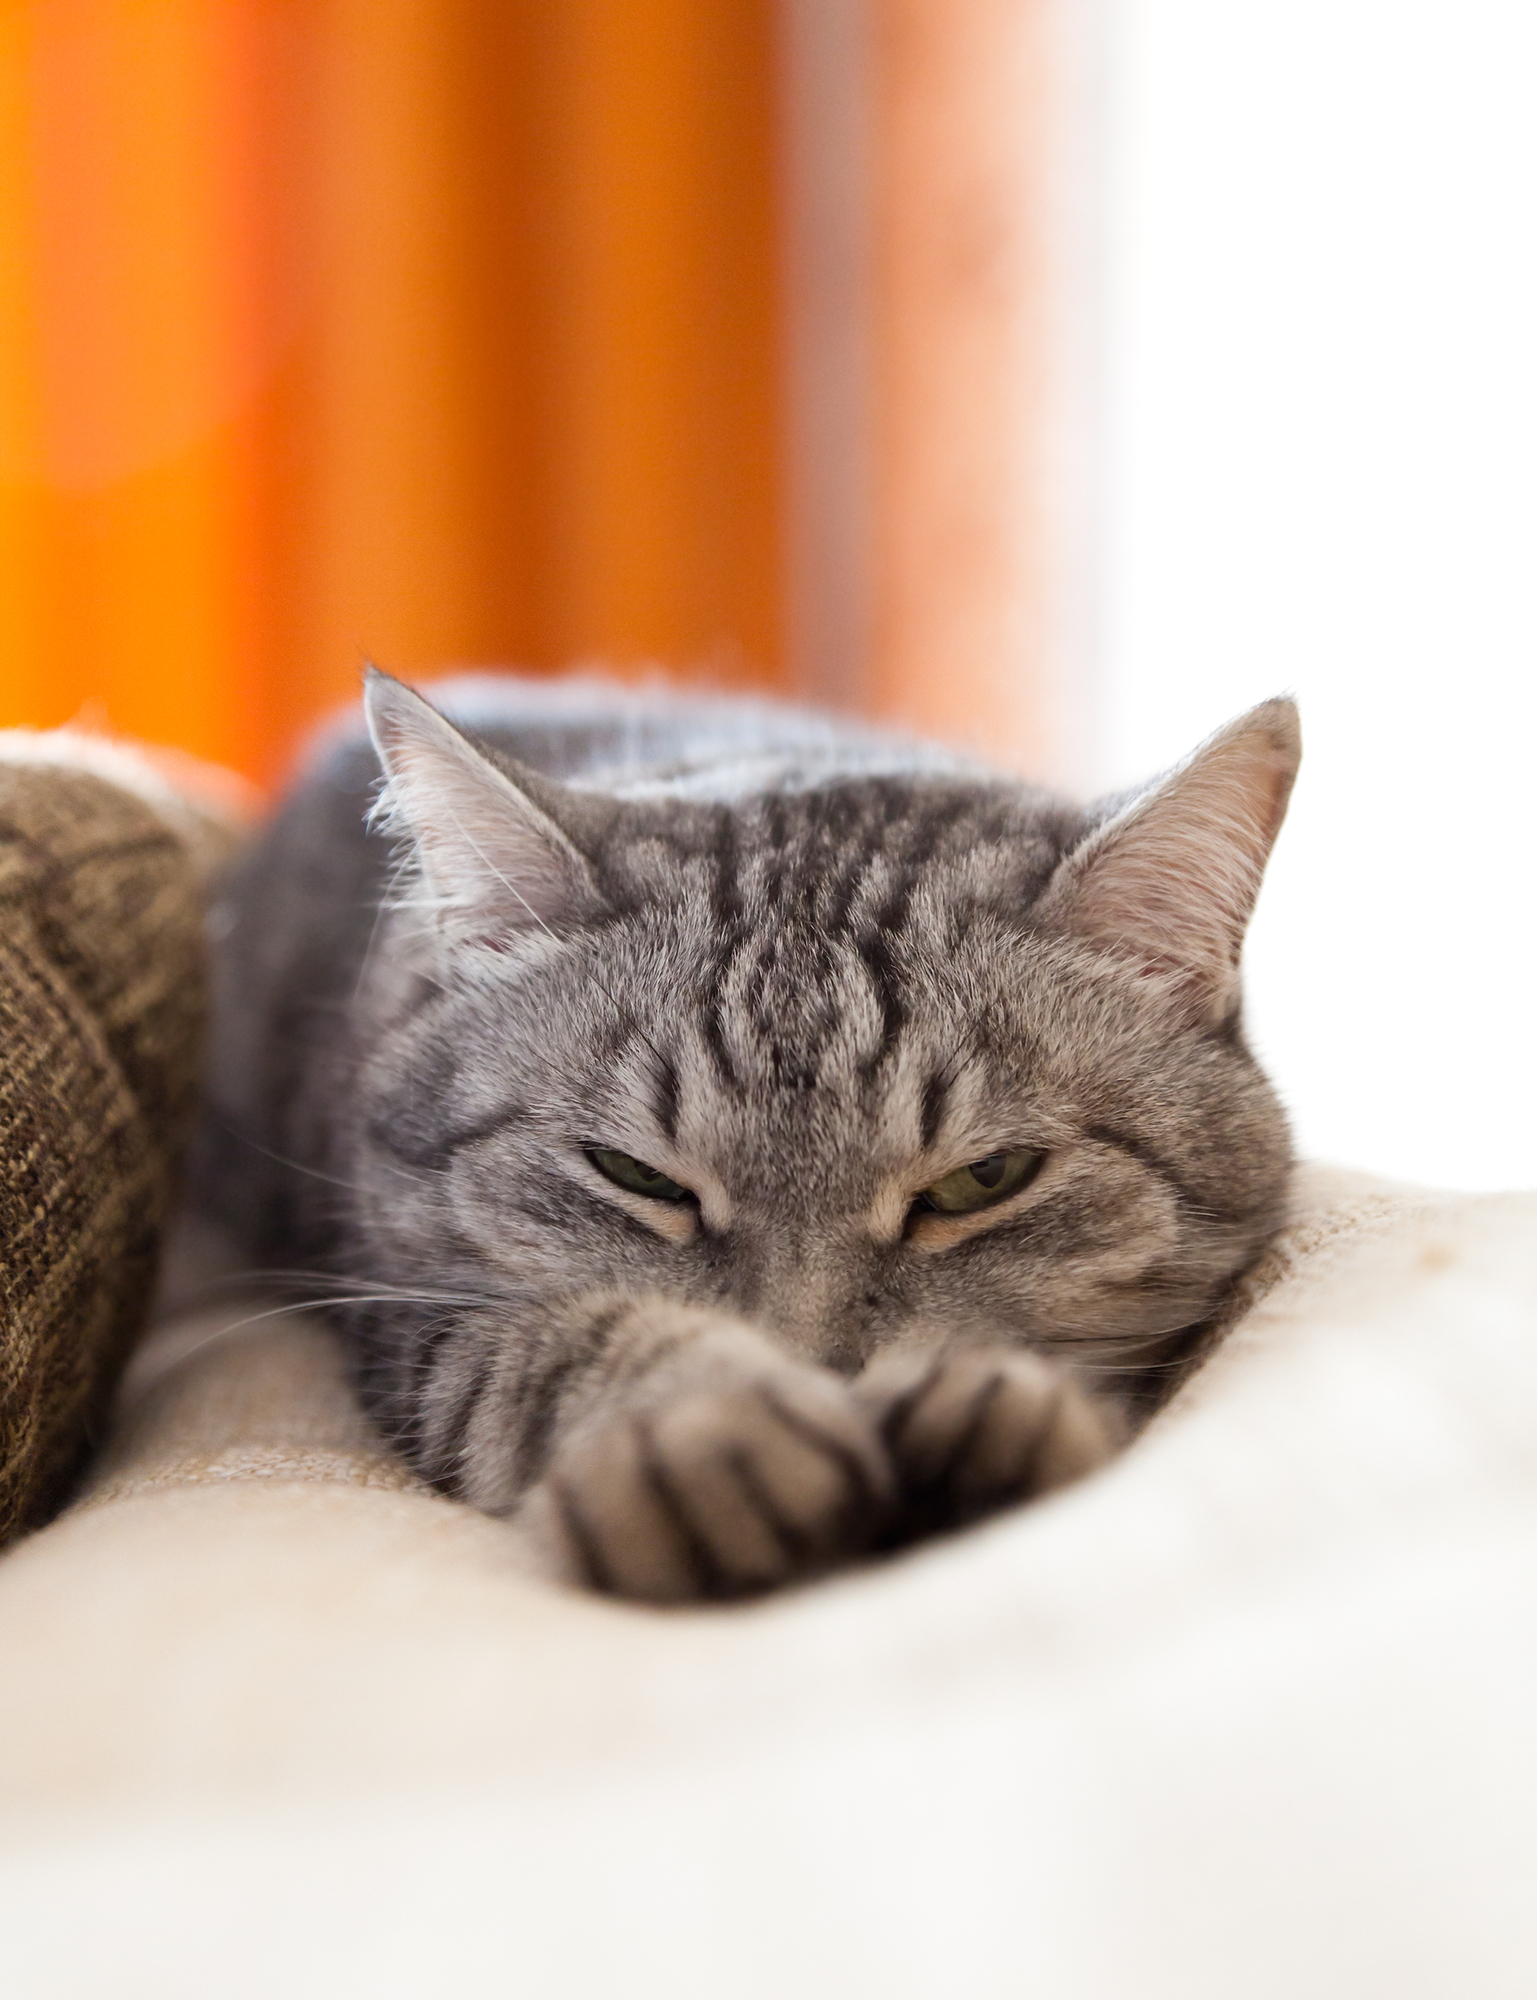 When Does Cat Vomiting Indicate a Problem? West Pine Animal Hospital